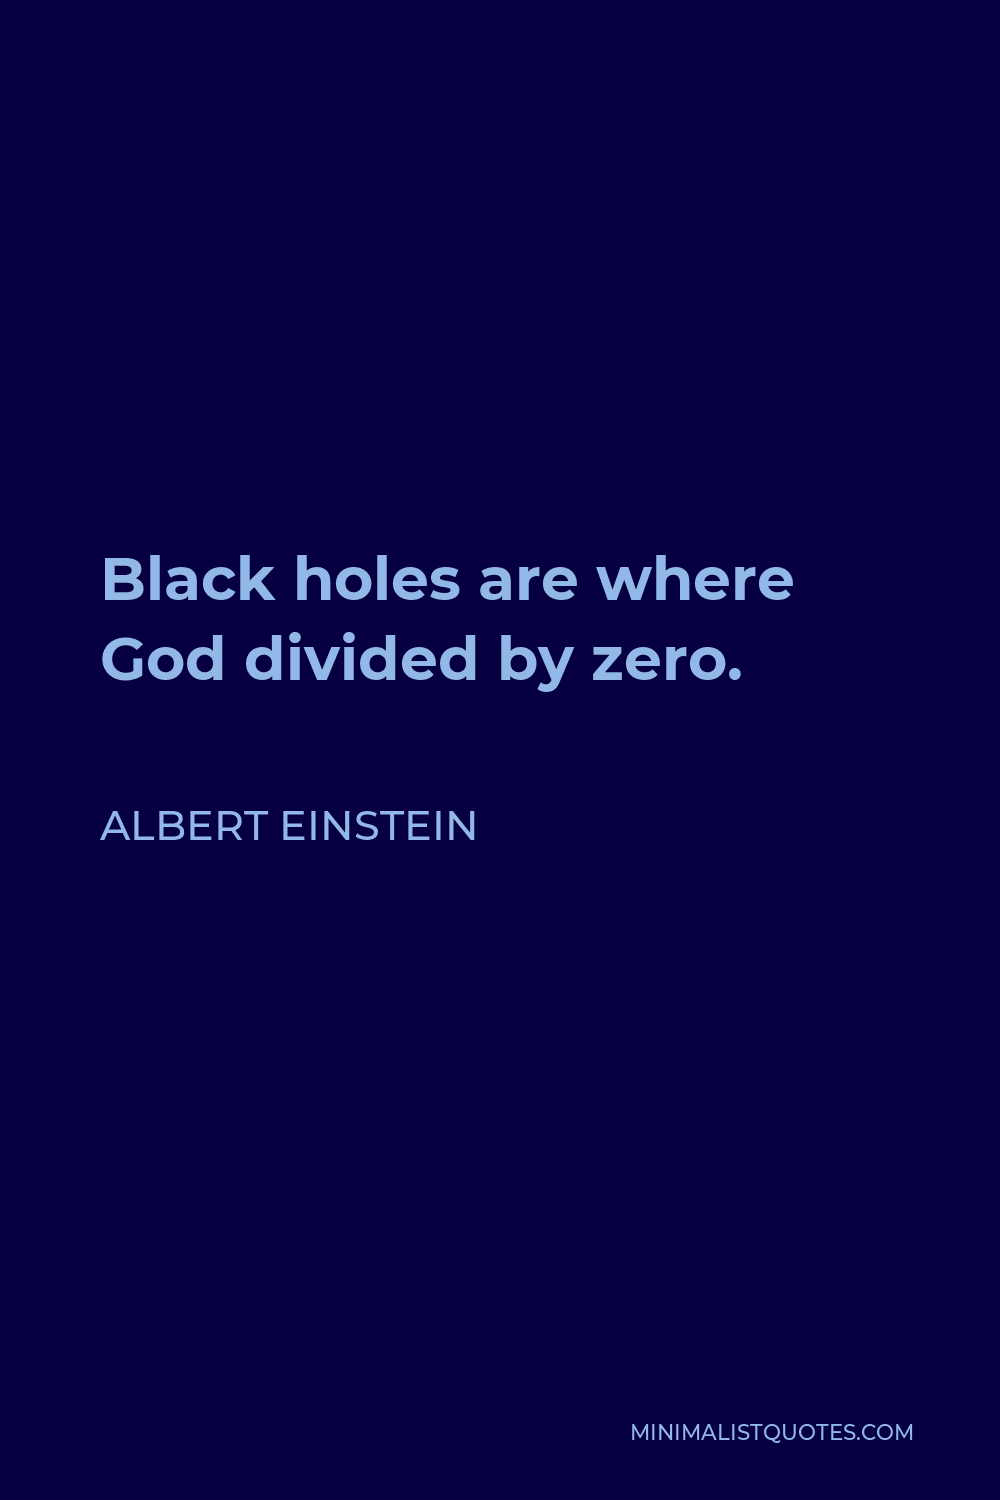 Albert Einstein Quote - Black holes are where God divided by zero.